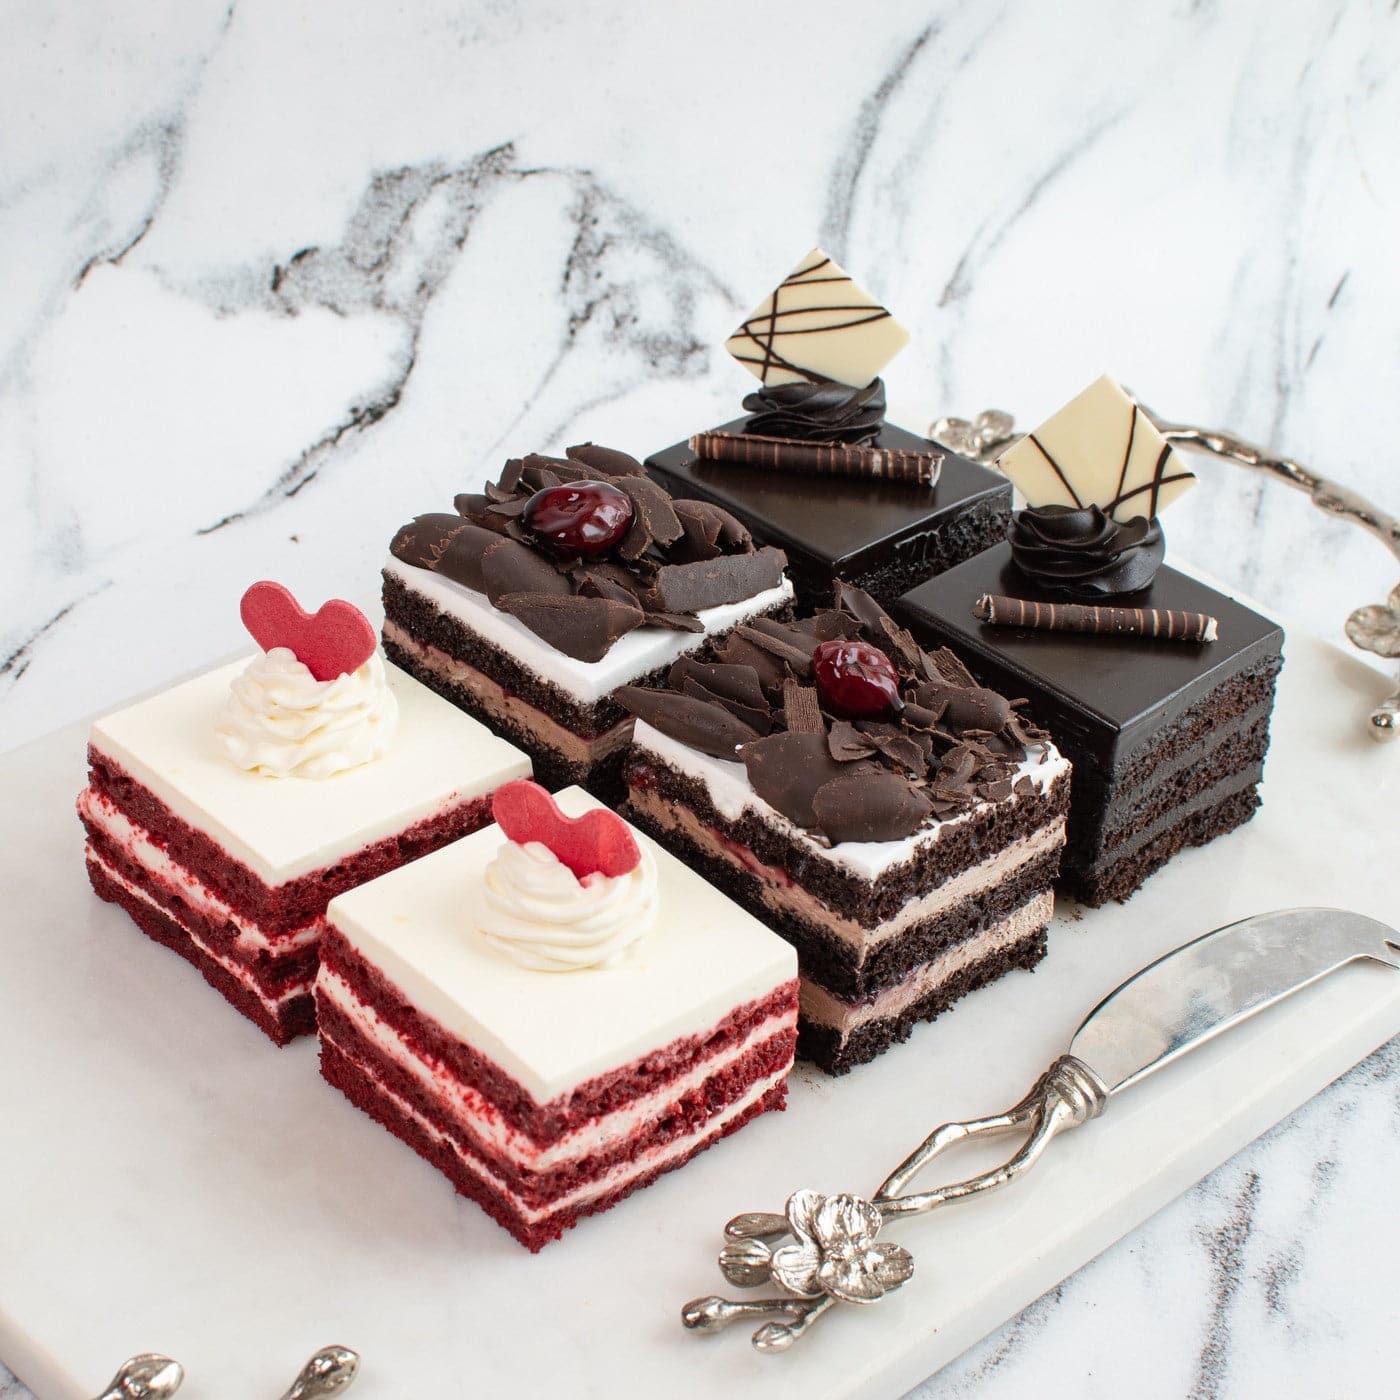 Classic Cakes & Slices | Lutz Pastry Shop | Chicago Bakery